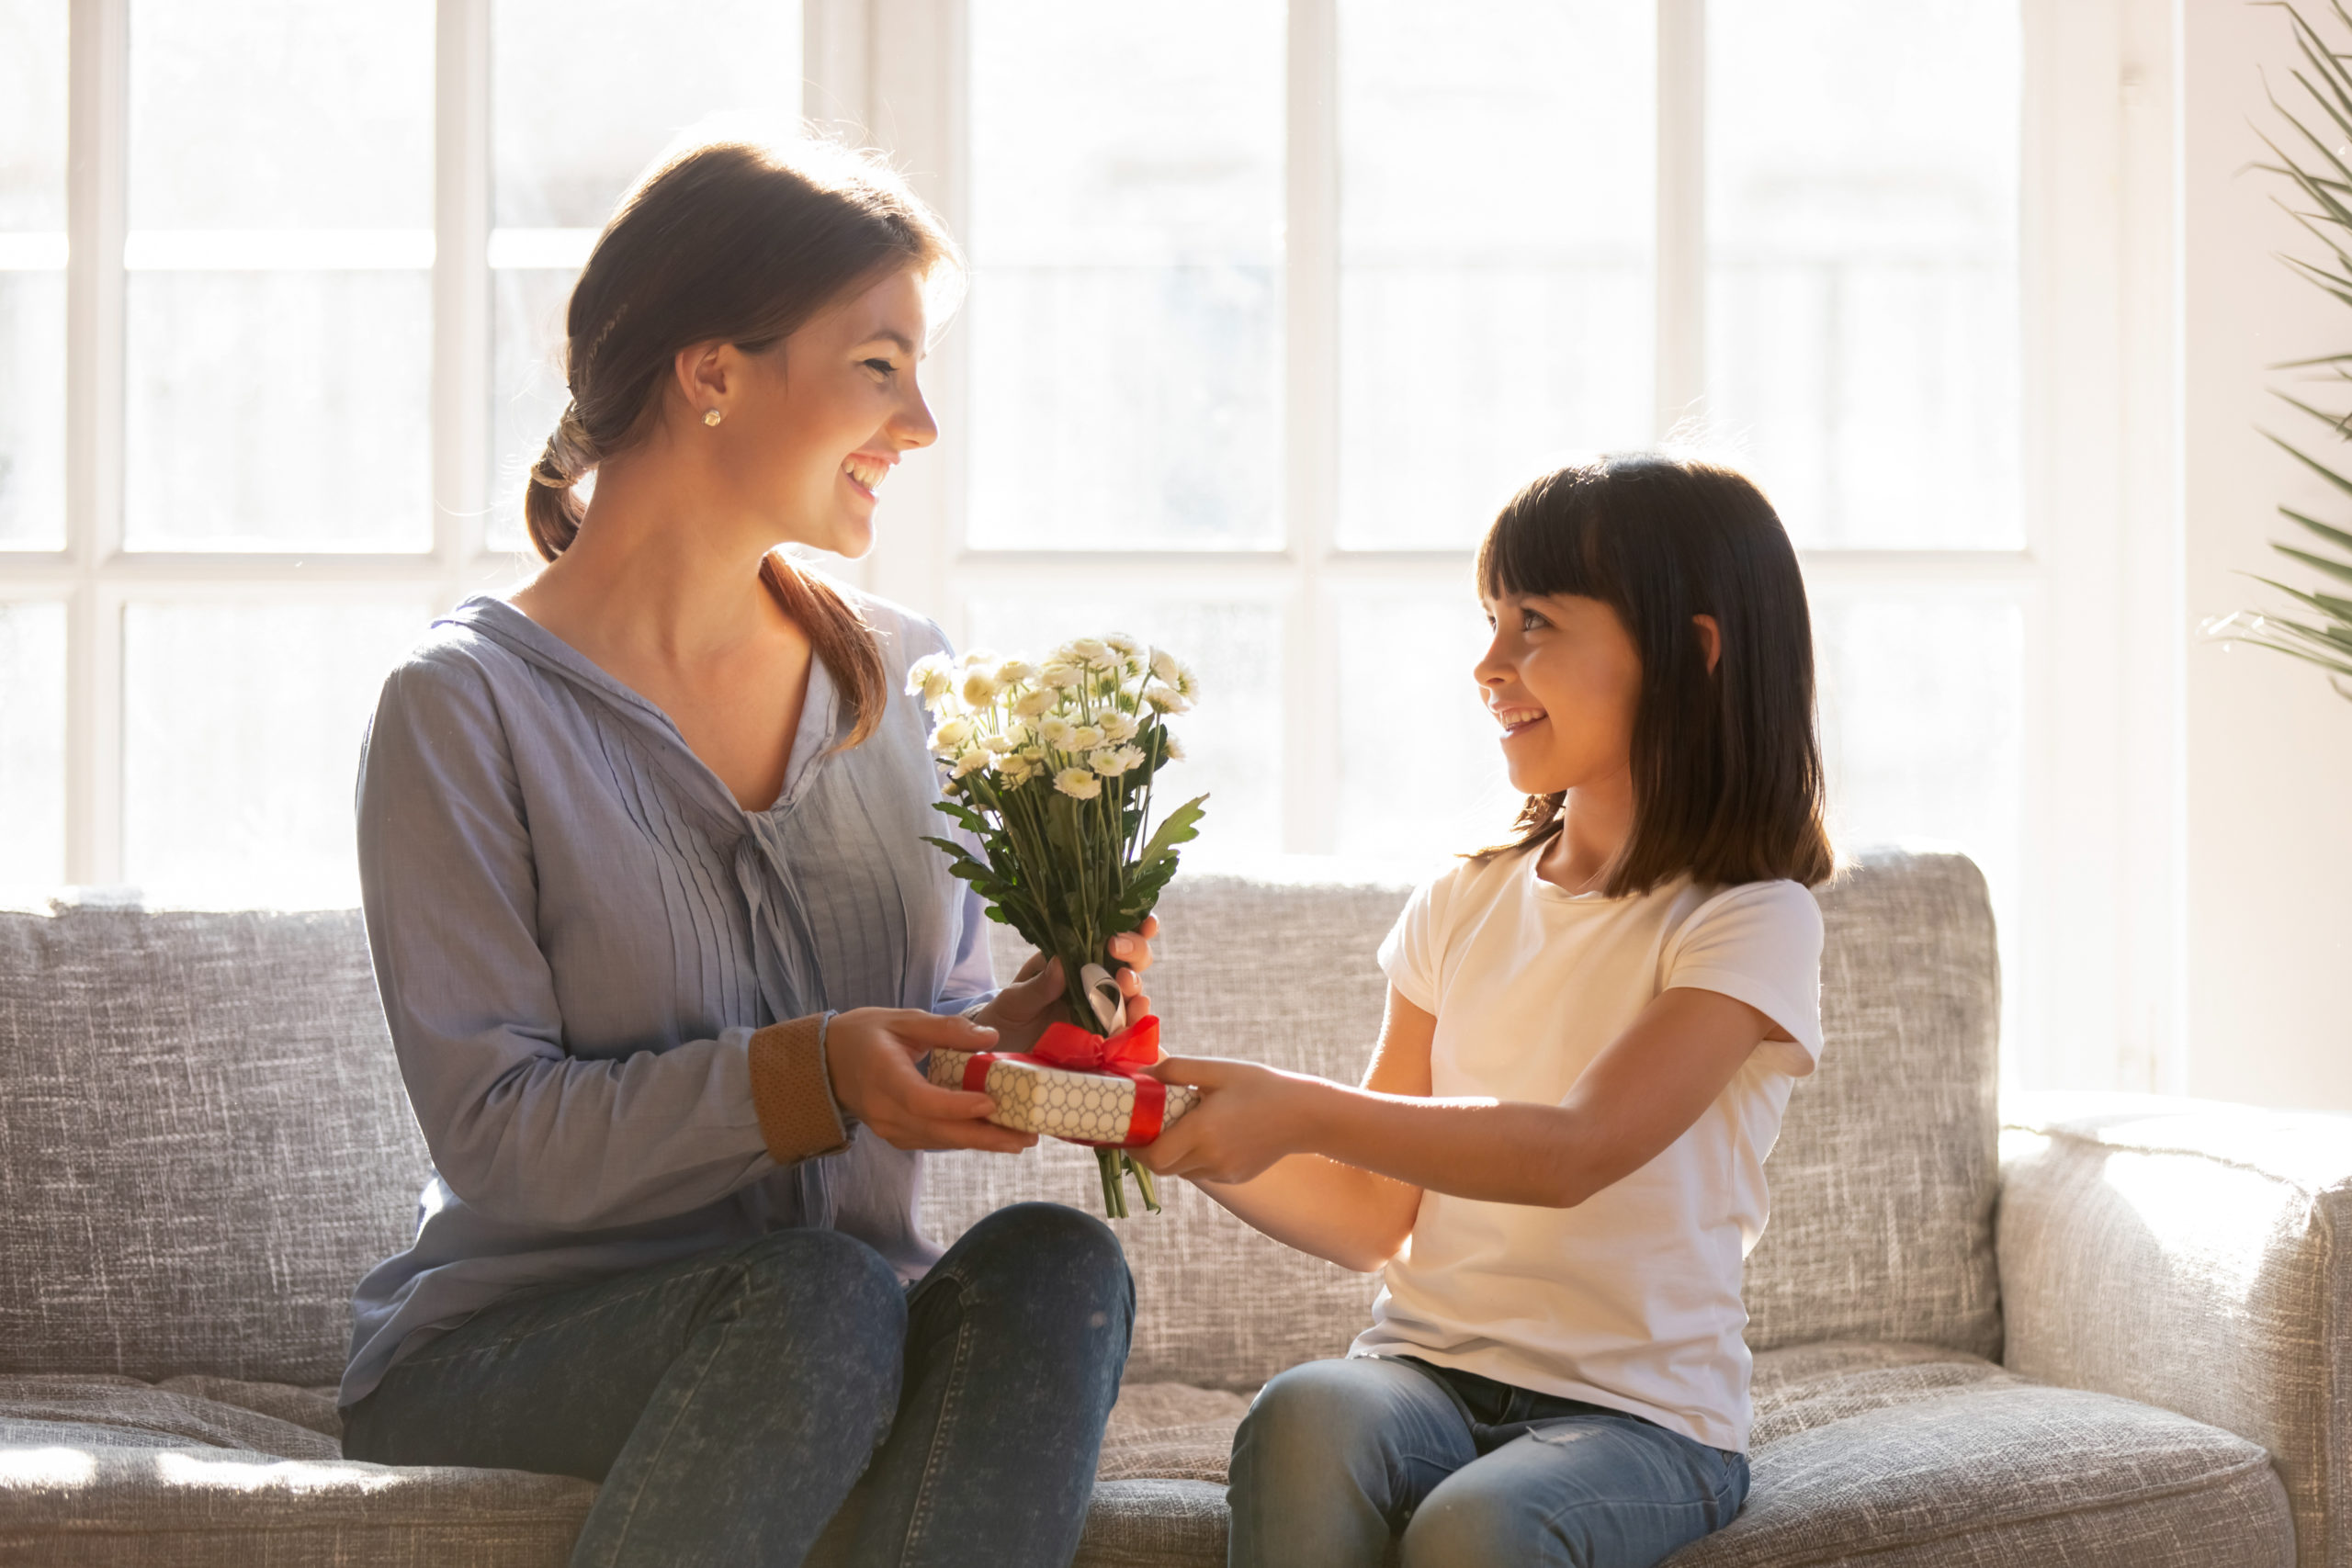 How to Instill Gratefulness in Children During the Holidays